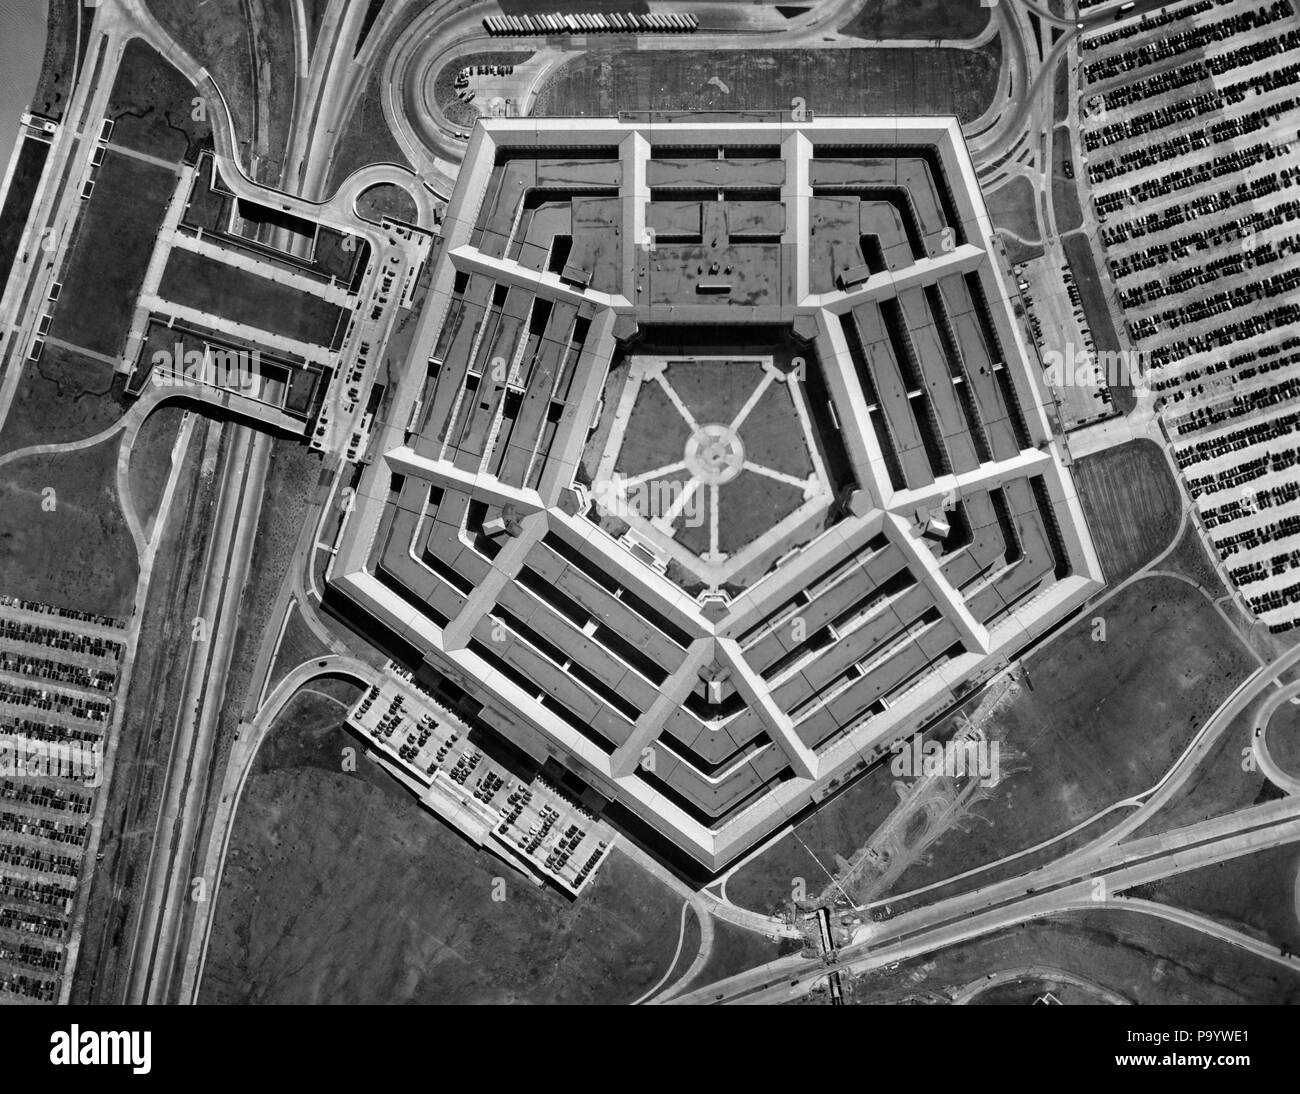 1940s 1950s AERIAL VIEW THE PENTAGON ARLINGTON VA USA - q74724 CPC001 HARS PROTECTION STRENGTH STRATEGY EXTERIOR KNOWLEDGE LEADERSHIP POWERFUL TRAVEL USA AUTHORITY 1943 REAL ESTATE EAST COAST STRUCTURES GEOMETRIC SUPPORT EDIFICE ARMED FORCE FORTRESS SYMBOLIC WASHINGTON DC DEFENSE HEADQUARTERS HUB RESORTS SIDES VA AERIAL VIEW ARLINGTON BLACK AND WHITE DEPARTMENT OF DEFENSE ESTABLISHMENT GEOMETRY OLD FASHIONED PENTAGON REPRESENTATION Stock Photo